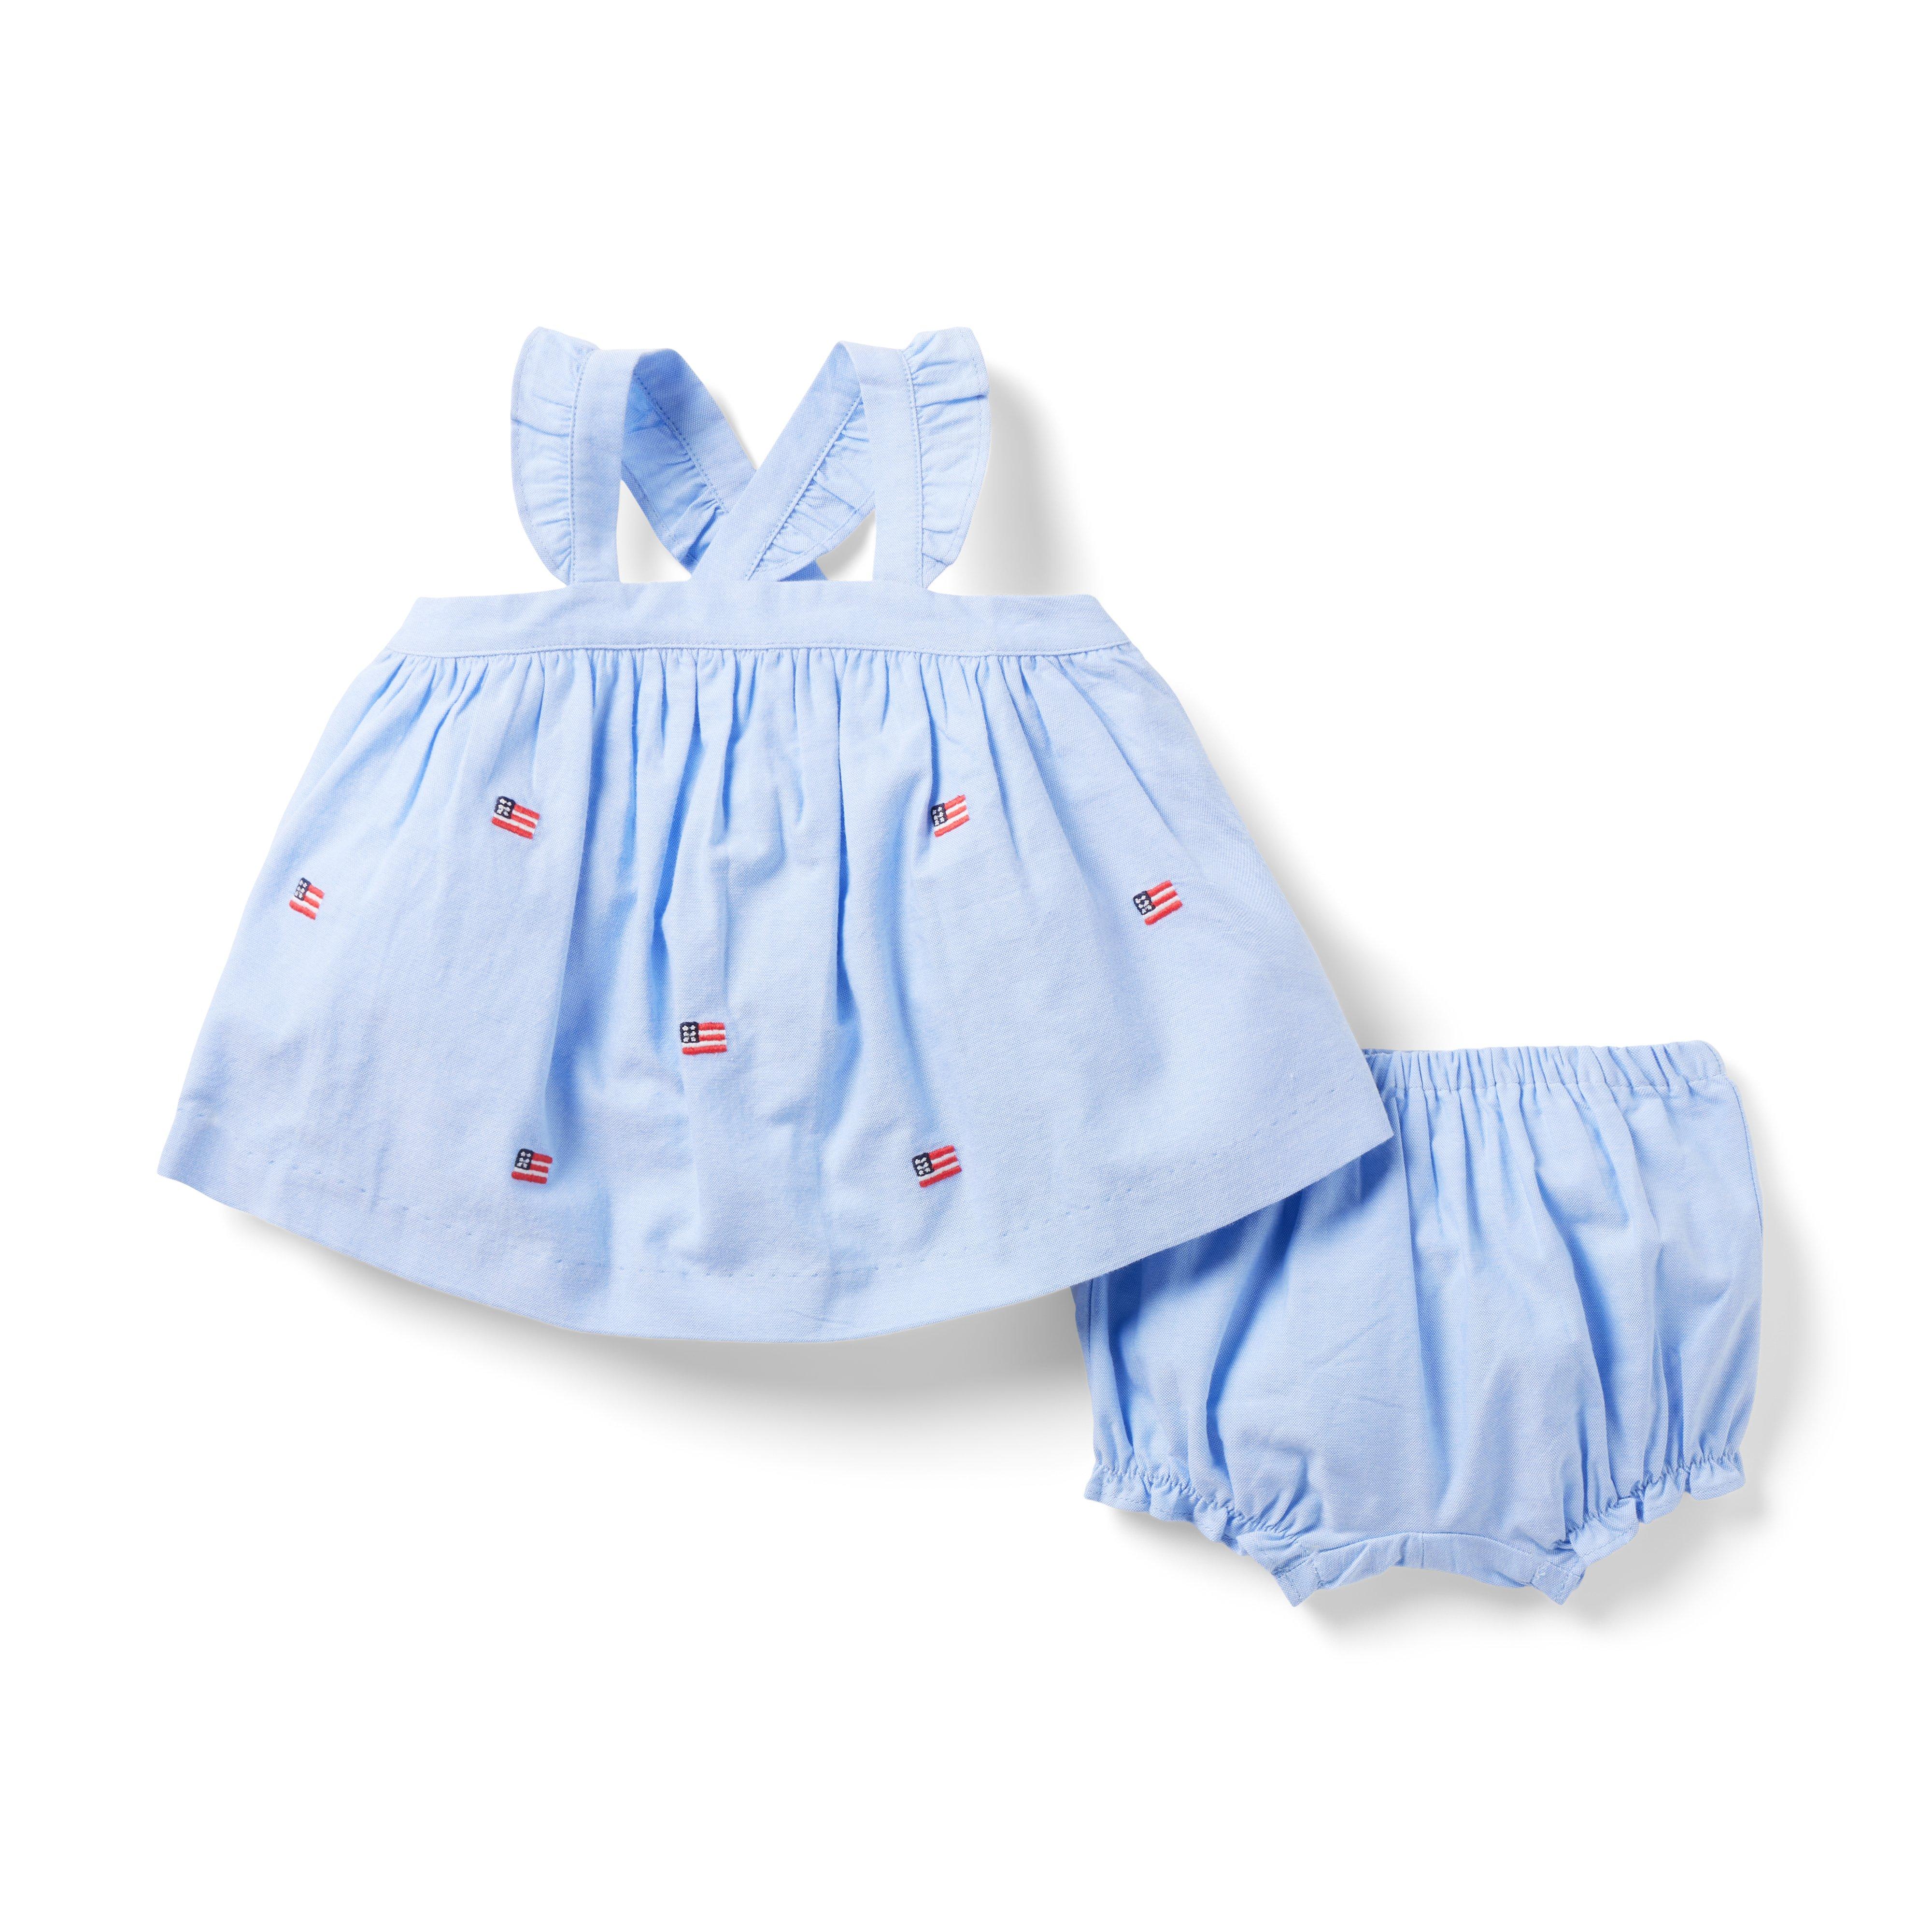 The Embroidered Oxford Baby Set 